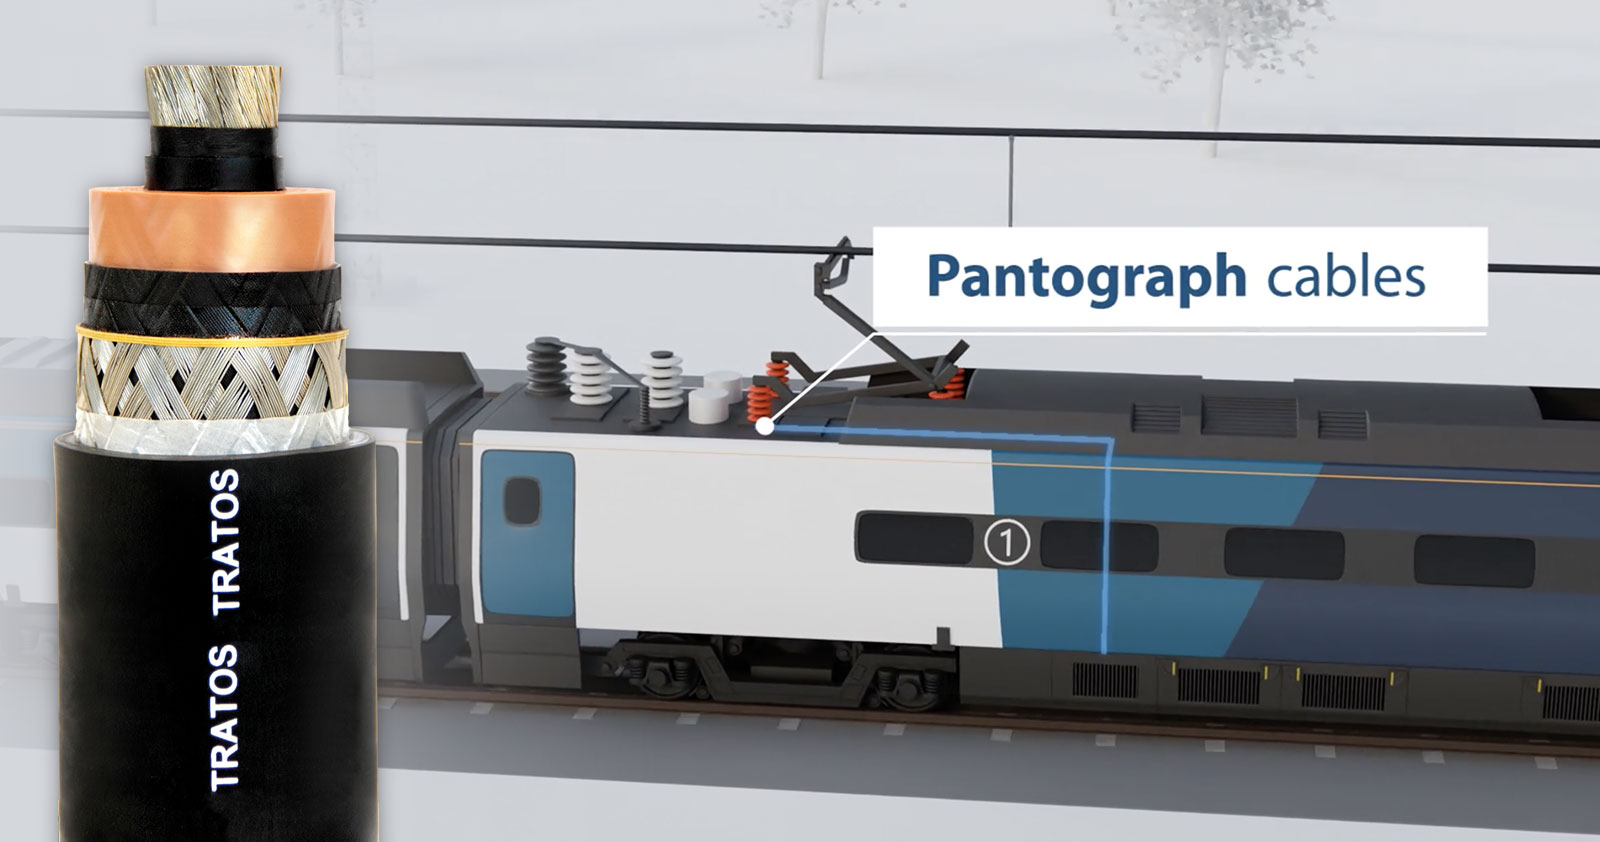 Pantograph cables - Railway Rolling Stock cables